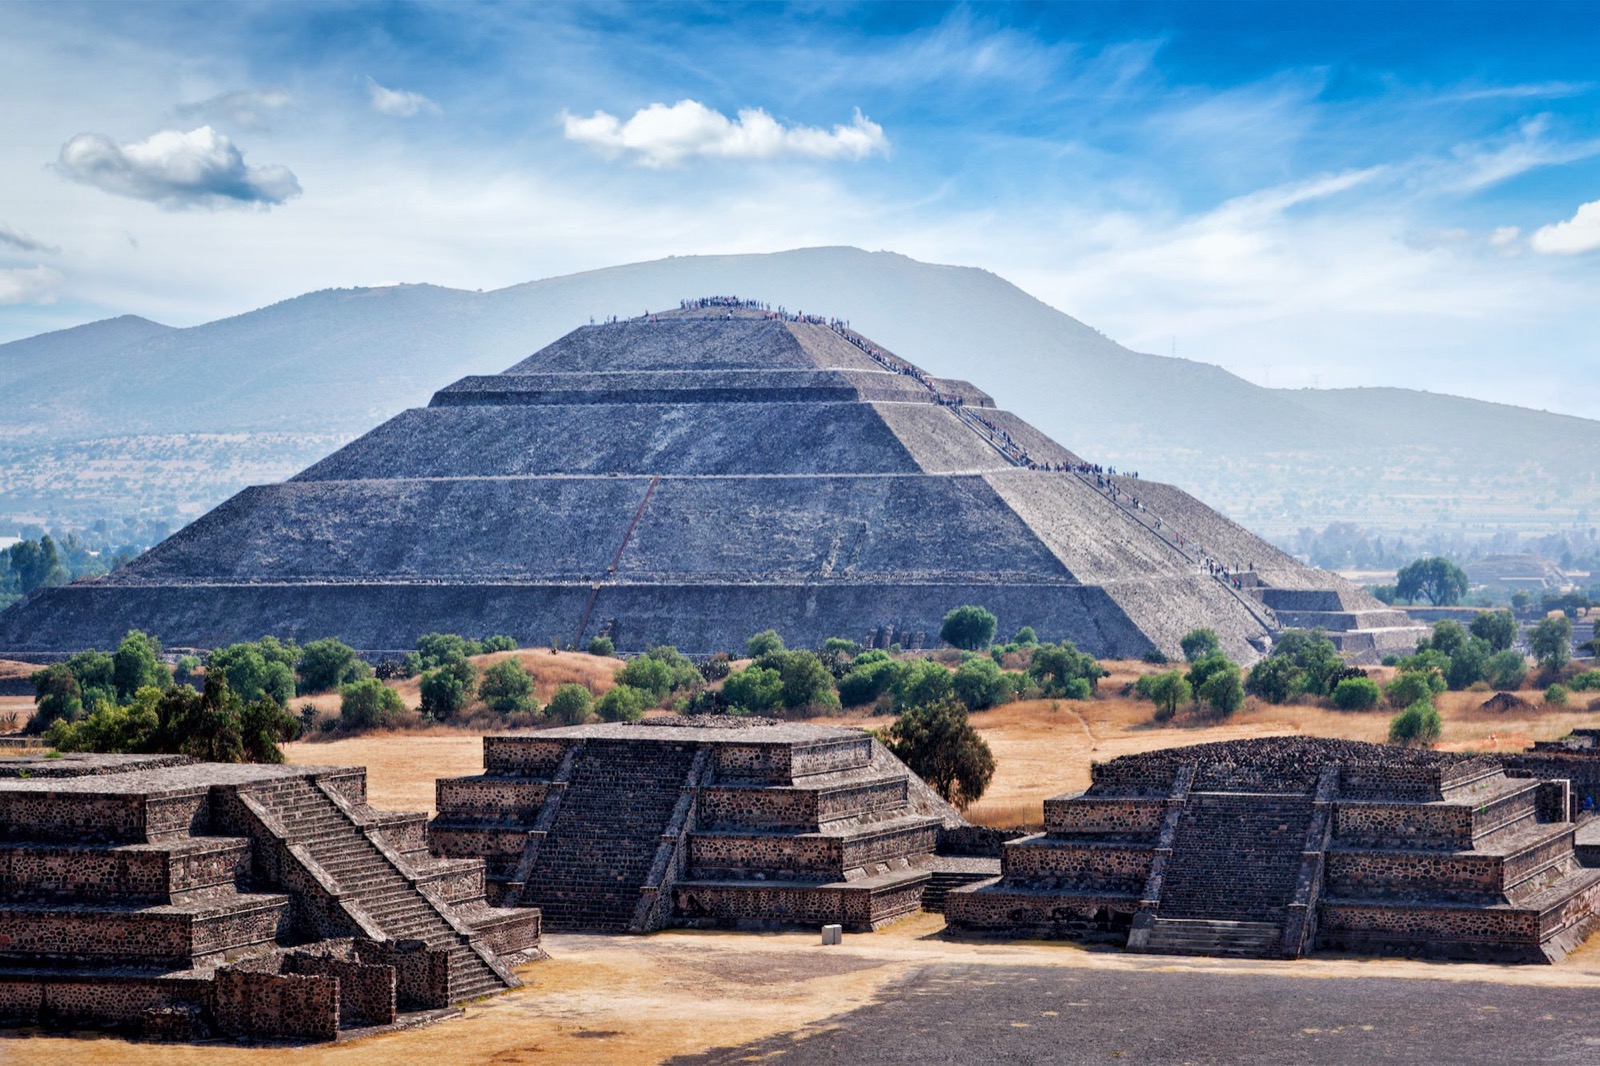 Test Your General Knowledge & See If You Can Ace This True or False Quiz Aztec Empire Civilization Tenochtitlan